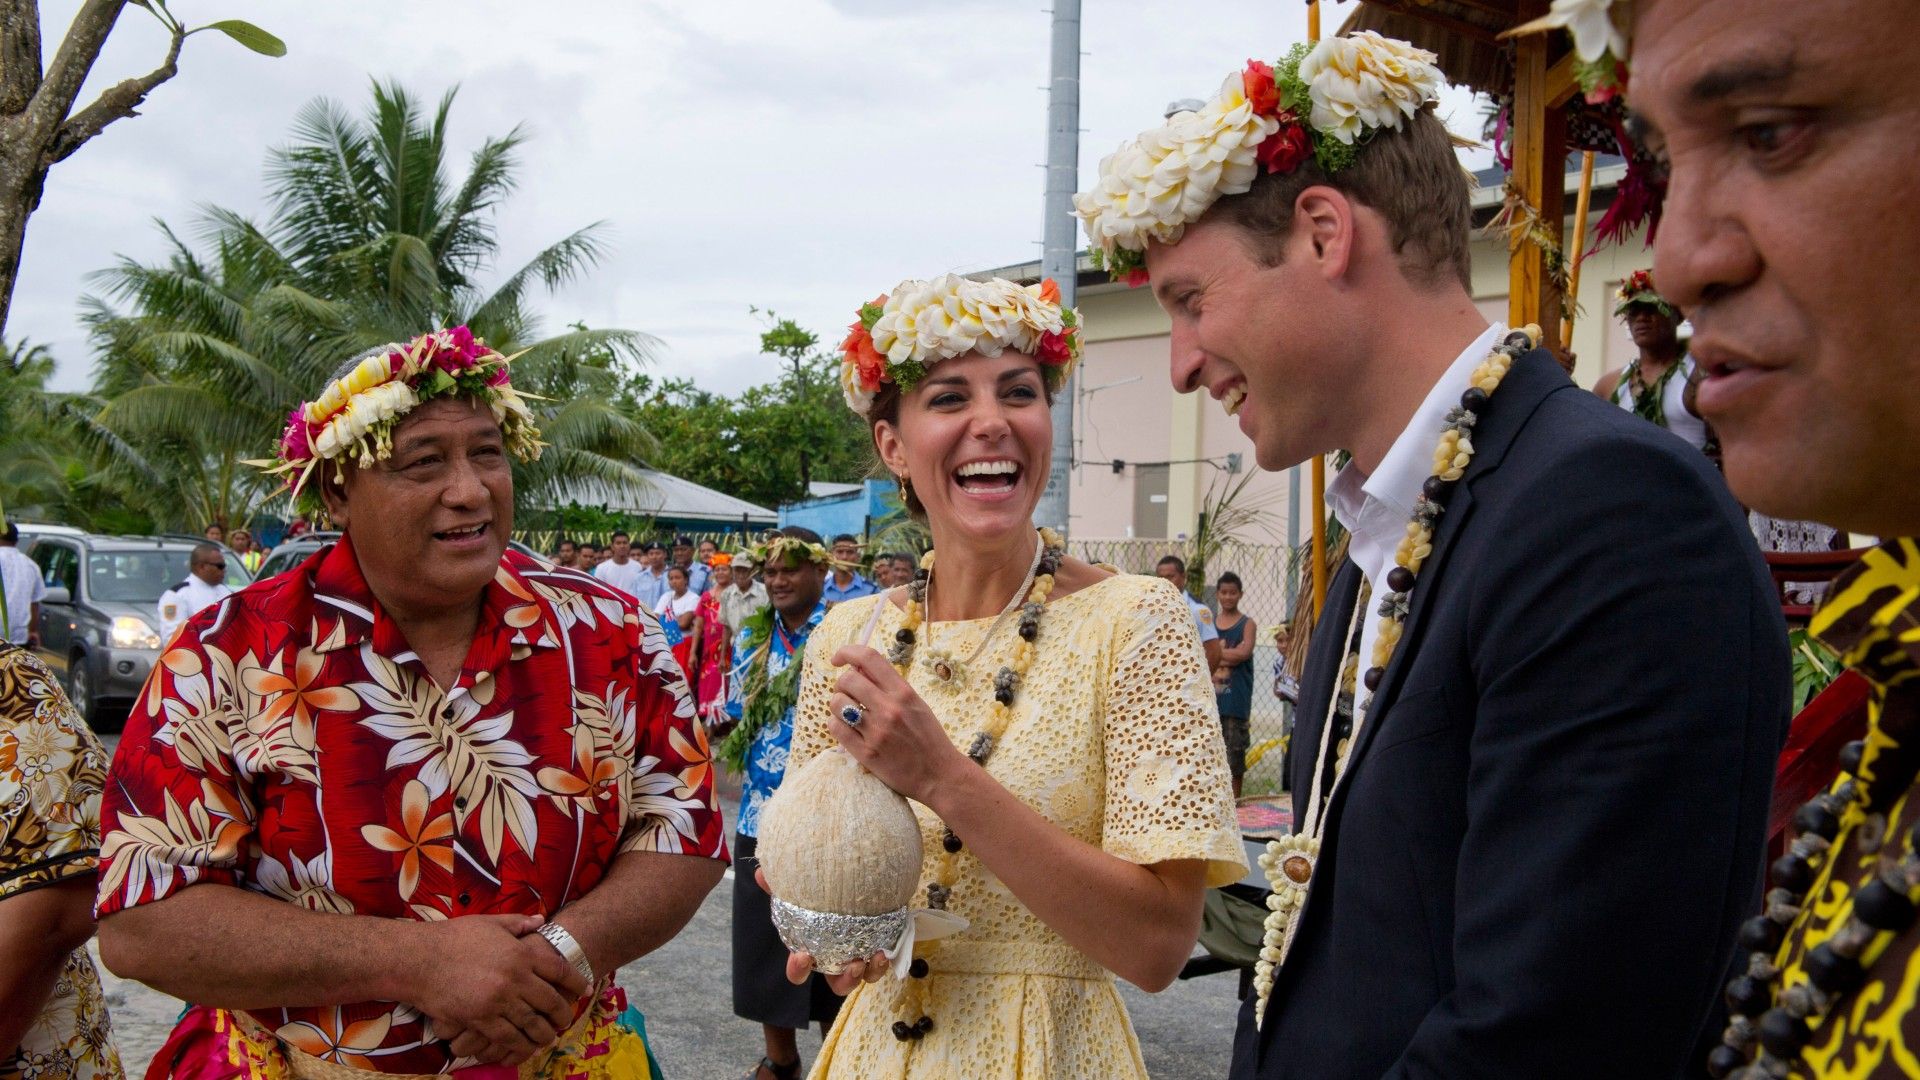 <p>                     Most people would love the refreshing, luxurious experience of drinking straight from a fresh, tropical coconut. And while Prince William and Kate Middleton clearly enjoyed getting to do just that during their 2012 visit to the South Pacific, there was something extra memorable about this moment.                   </p>                                      <p>                     The coconuts were came from a tree planted by Queen Elizabeth in 1982 - a lovely moment of past meeting present.                   </p>                                      <p>                     And then, in a full circle moment, the Duke and Duchess of Cambridge planted their own coconut trees. Perhaps we'll see future royals visiting in decades to come and doing the same.                   </p>